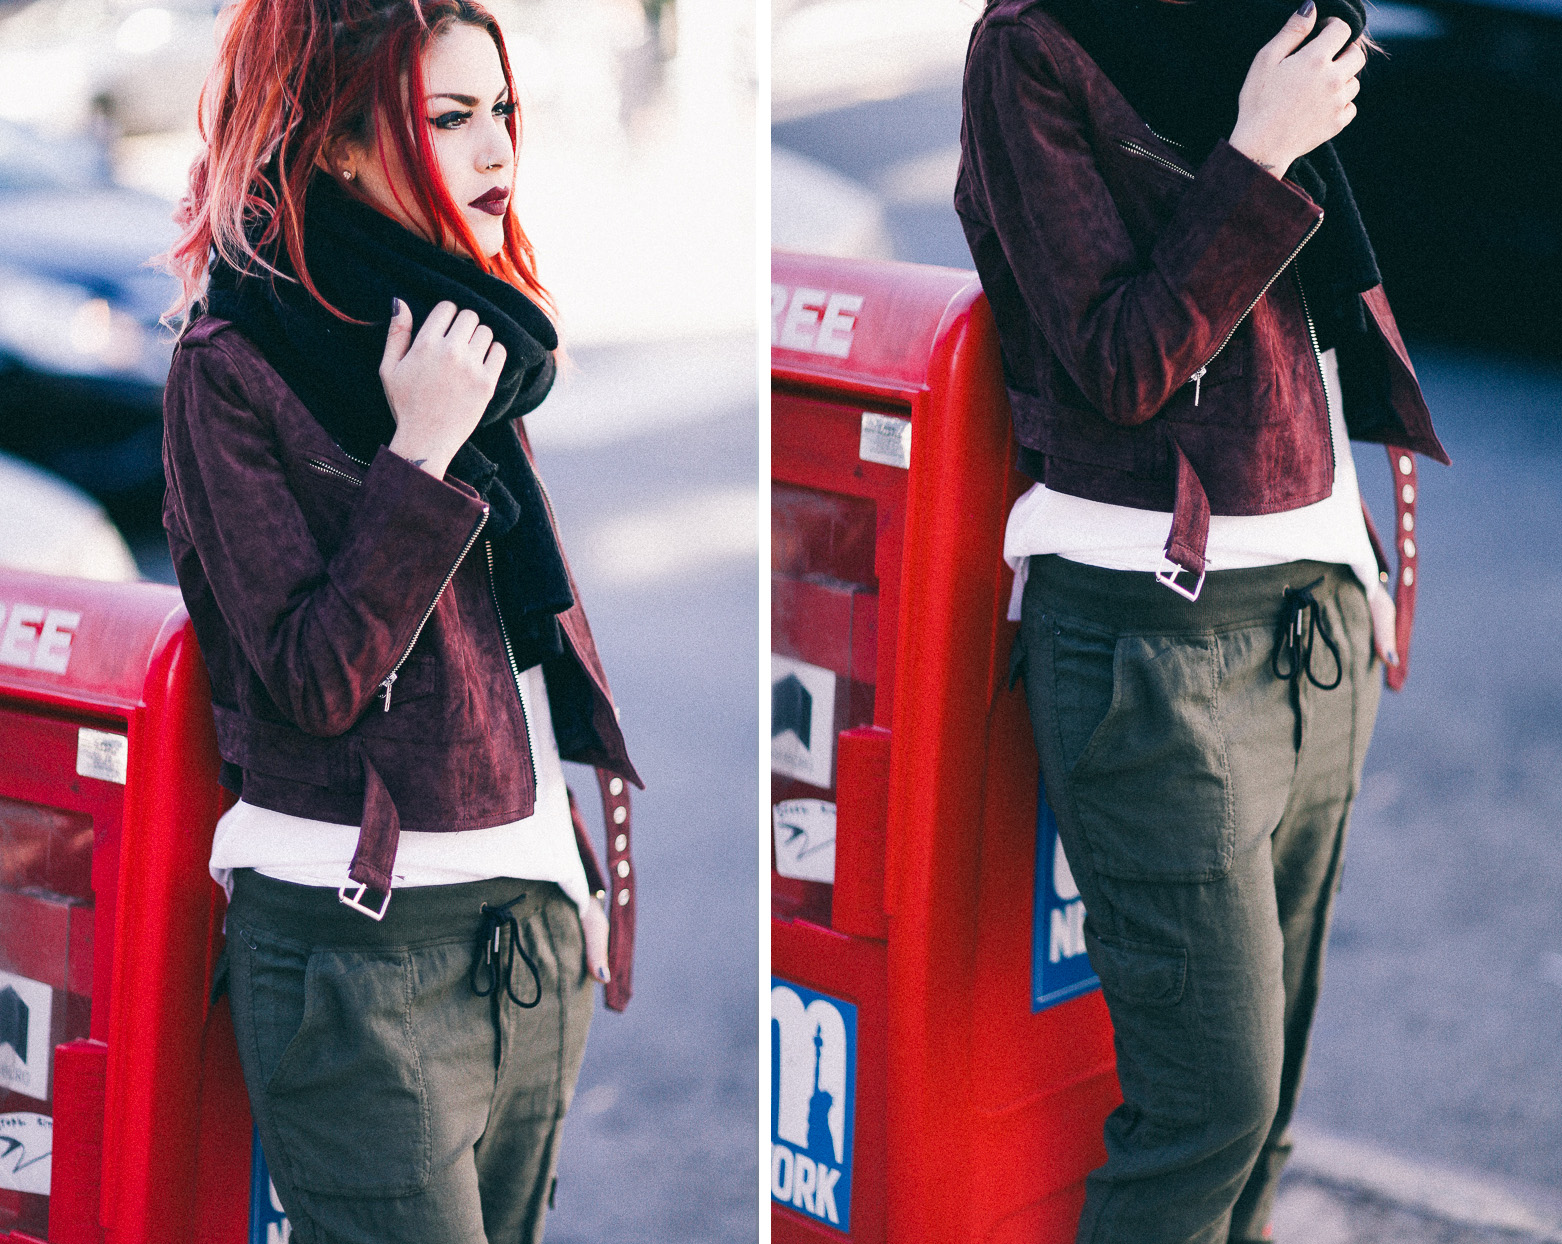 Le Happy wearing cargo pants and Obey Burgundy jacket